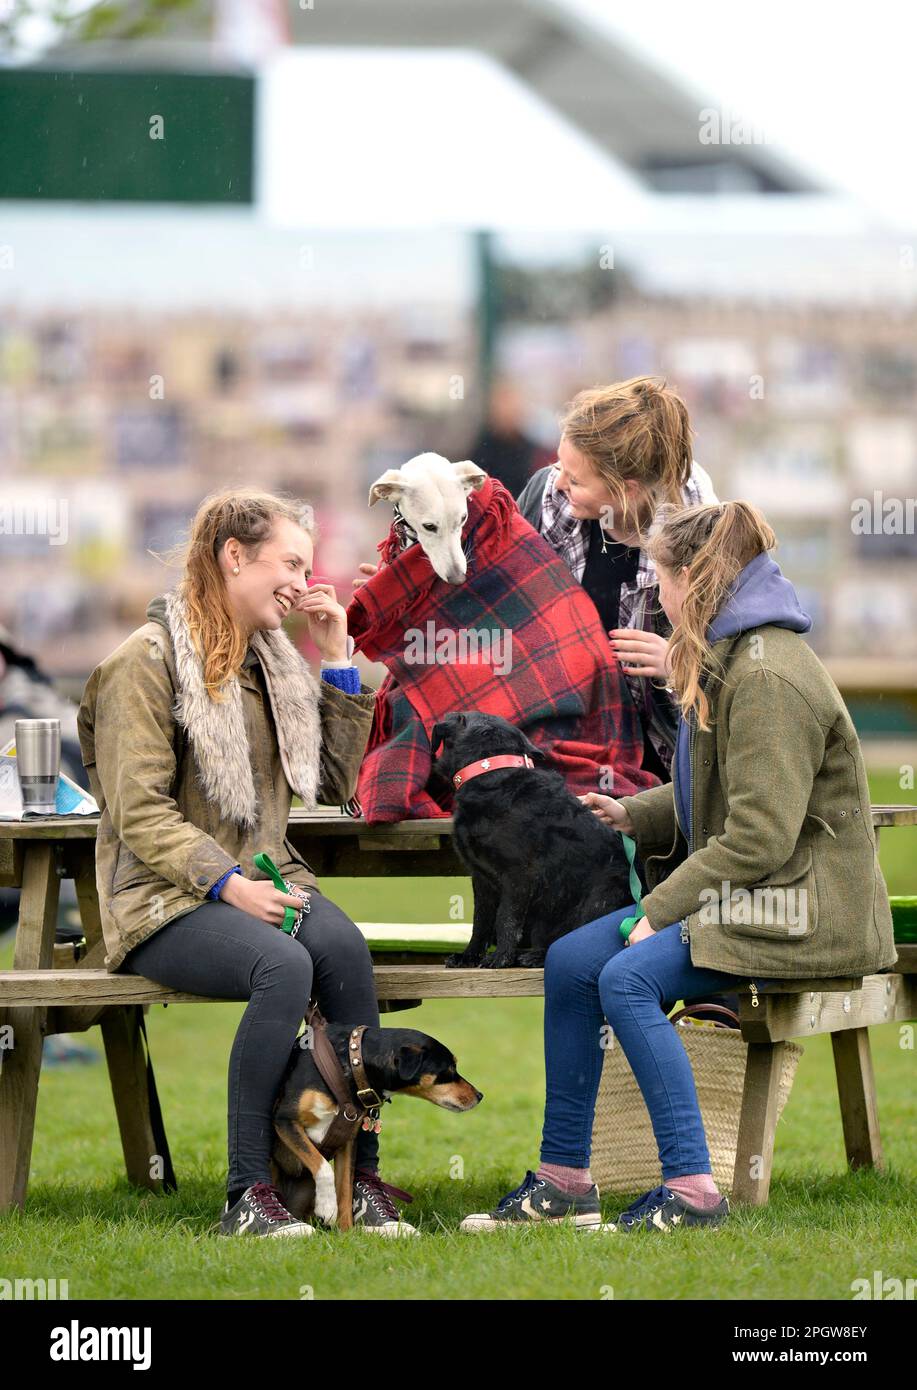 A Greyhound dog wrapped up in a rug from the rain at The Badminton Horse Trials in Gloucestershire, UK. Stock Photo